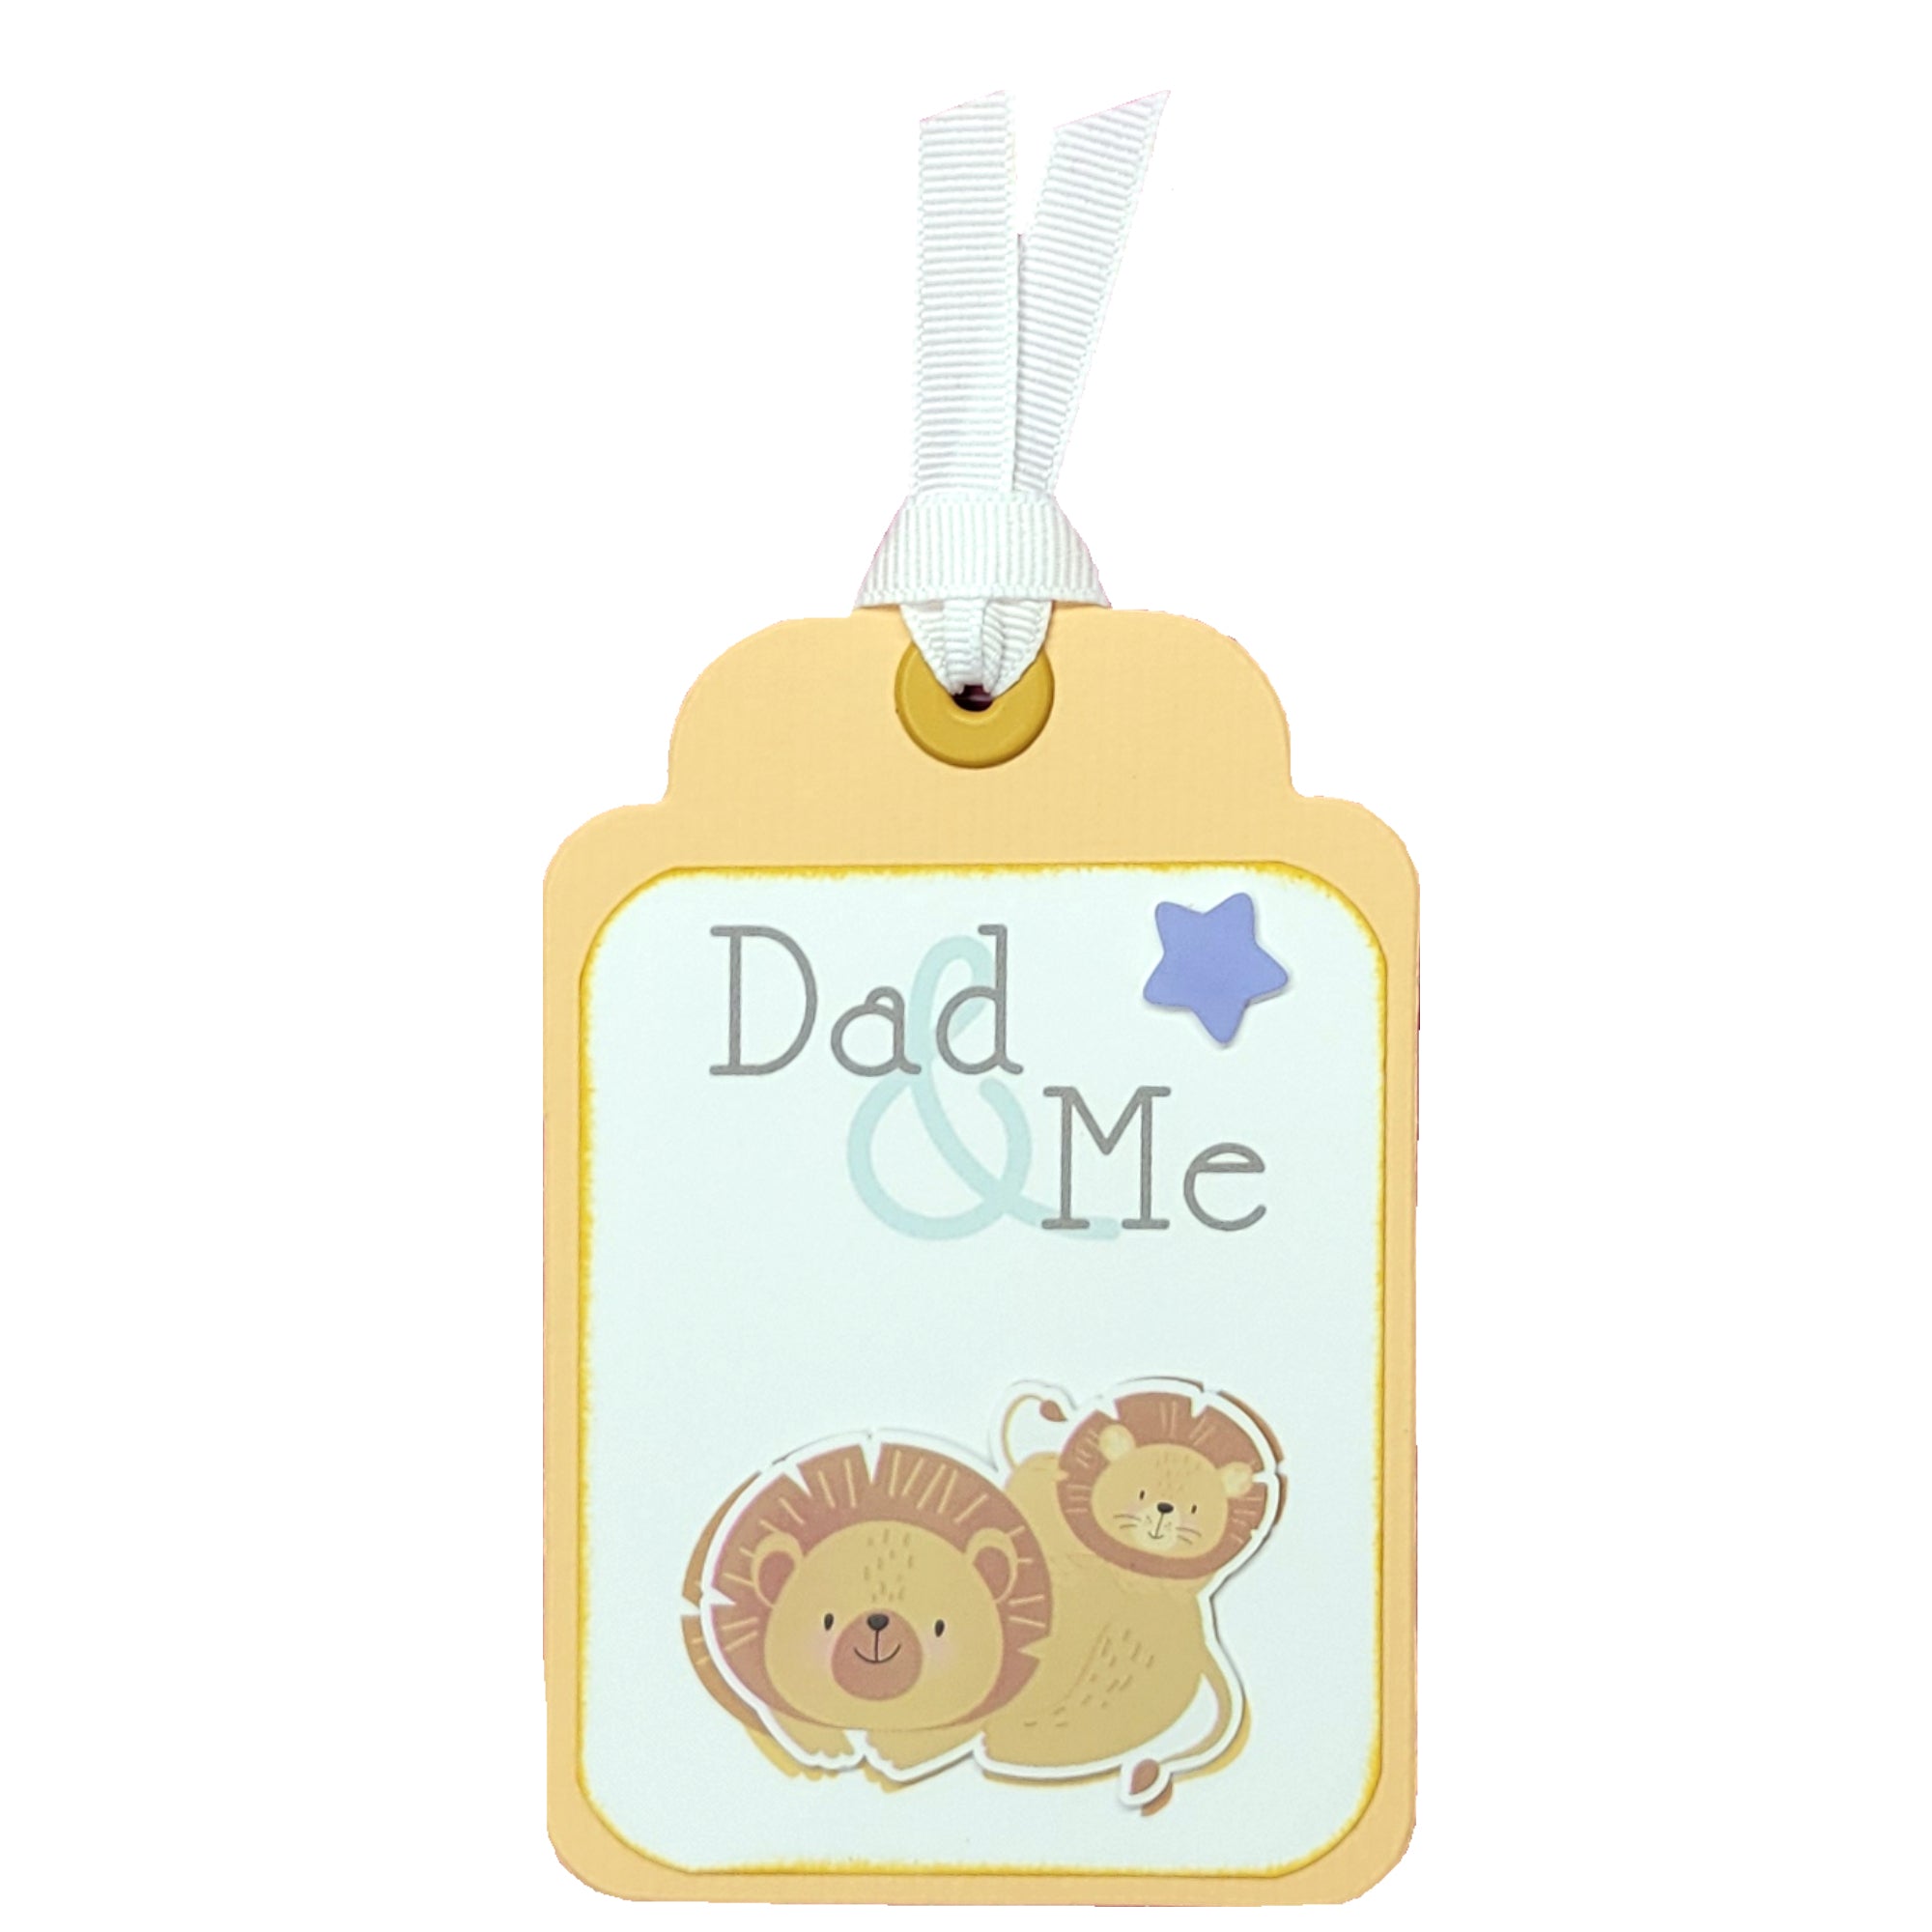 Hush Little Baby Collection 3 x 5 Dad & Me Tag Scrapbook Embellishment by SSC Designs